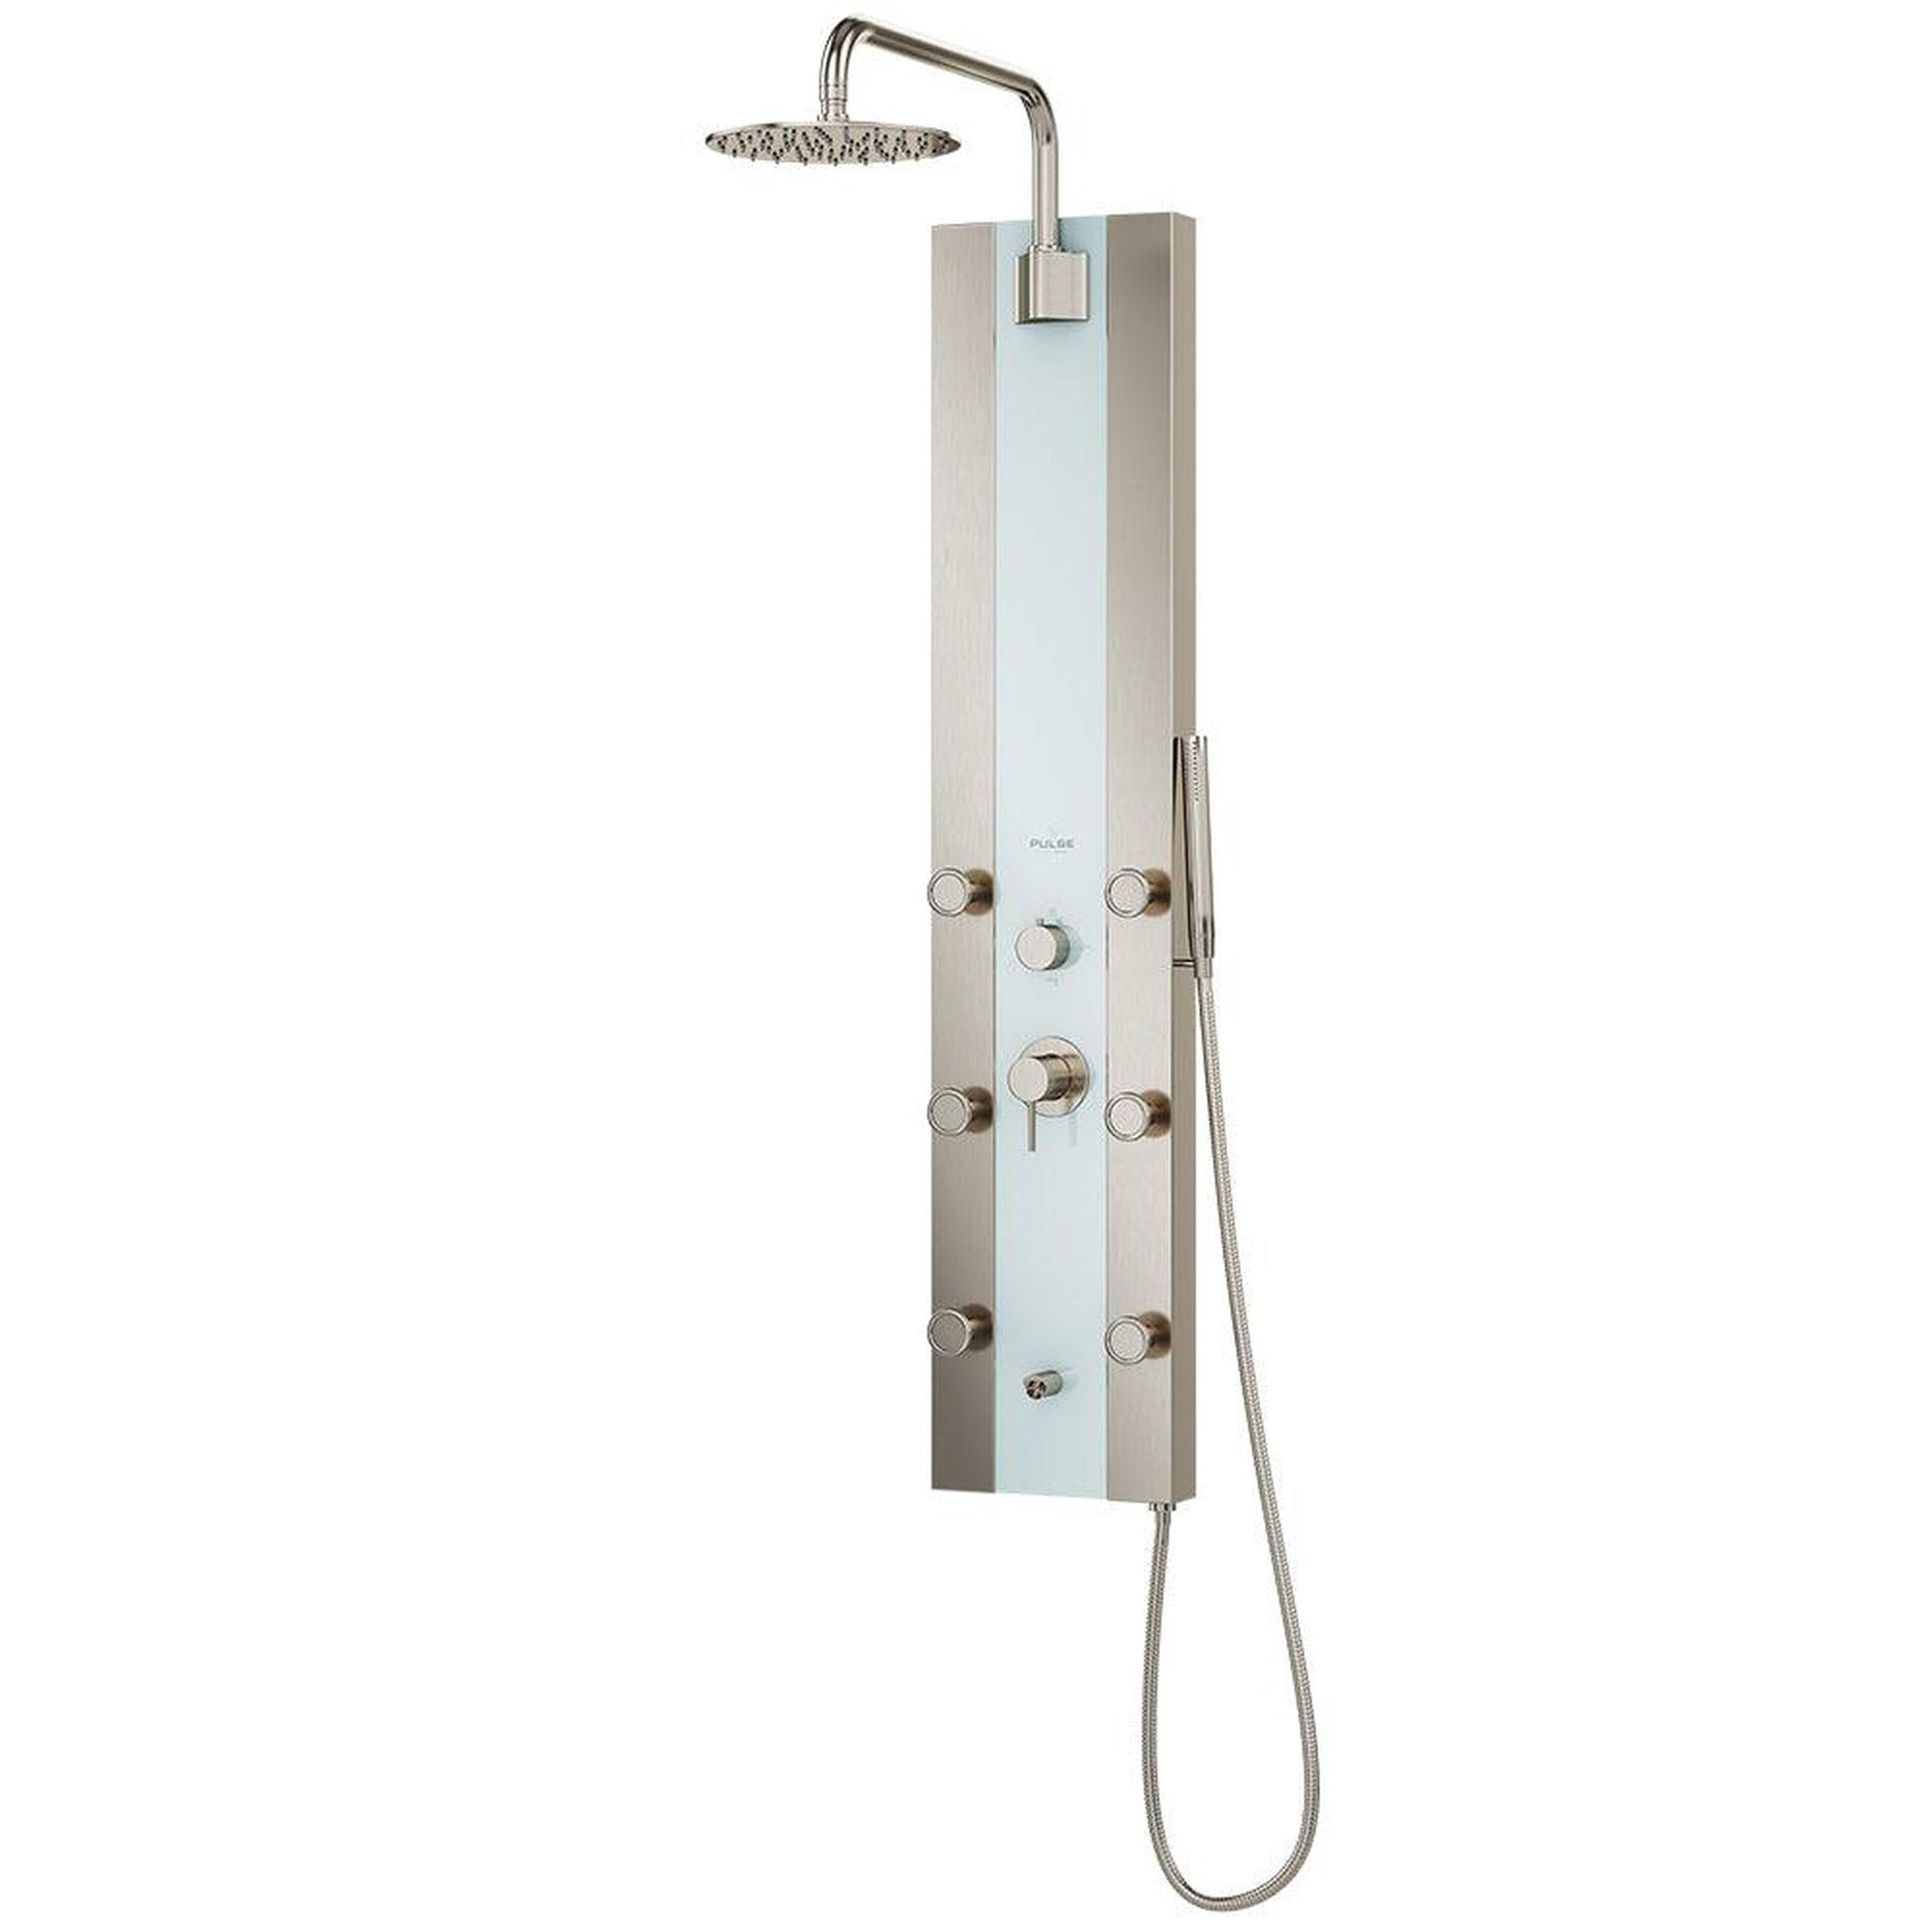 PULSE ShowerSpas Tropicana 2.5 GPM Rain Shower Panel in Brushed Nickel and Soft White Tempered Glass Finish 6-Single Function Body Jet and Hand Shower